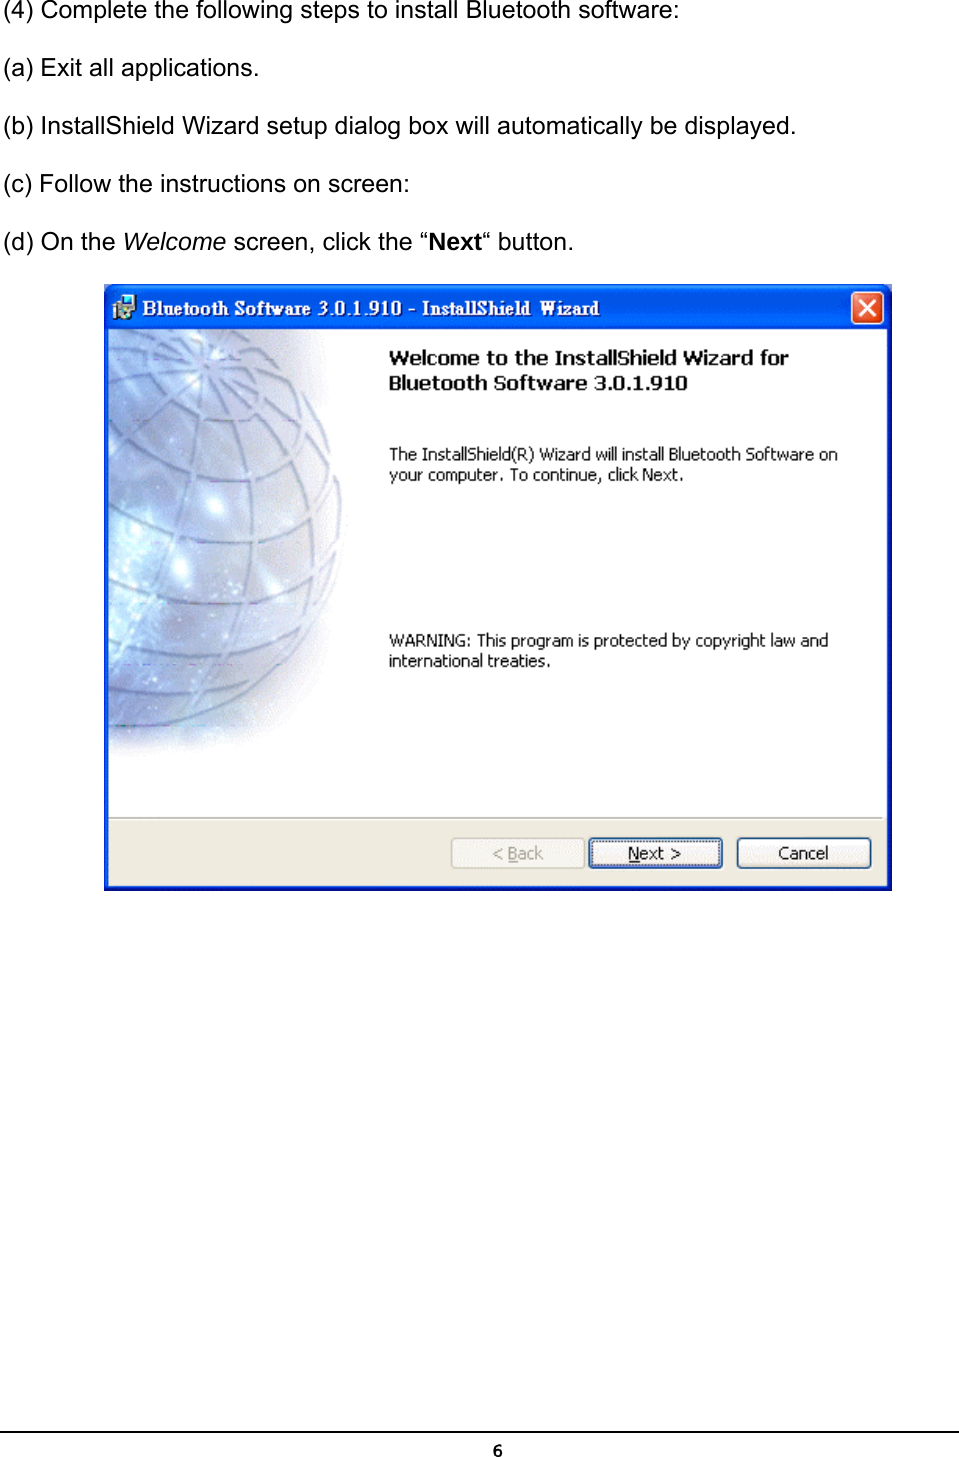   6(4) Complete the following steps to install Bluetooth software: (a) Exit all applications. (b) InstallShield Wizard setup dialog box will automatically be displayed. (c) Follow the instructions on screen: (d) On the Welcome screen, click the “Next“ button.  